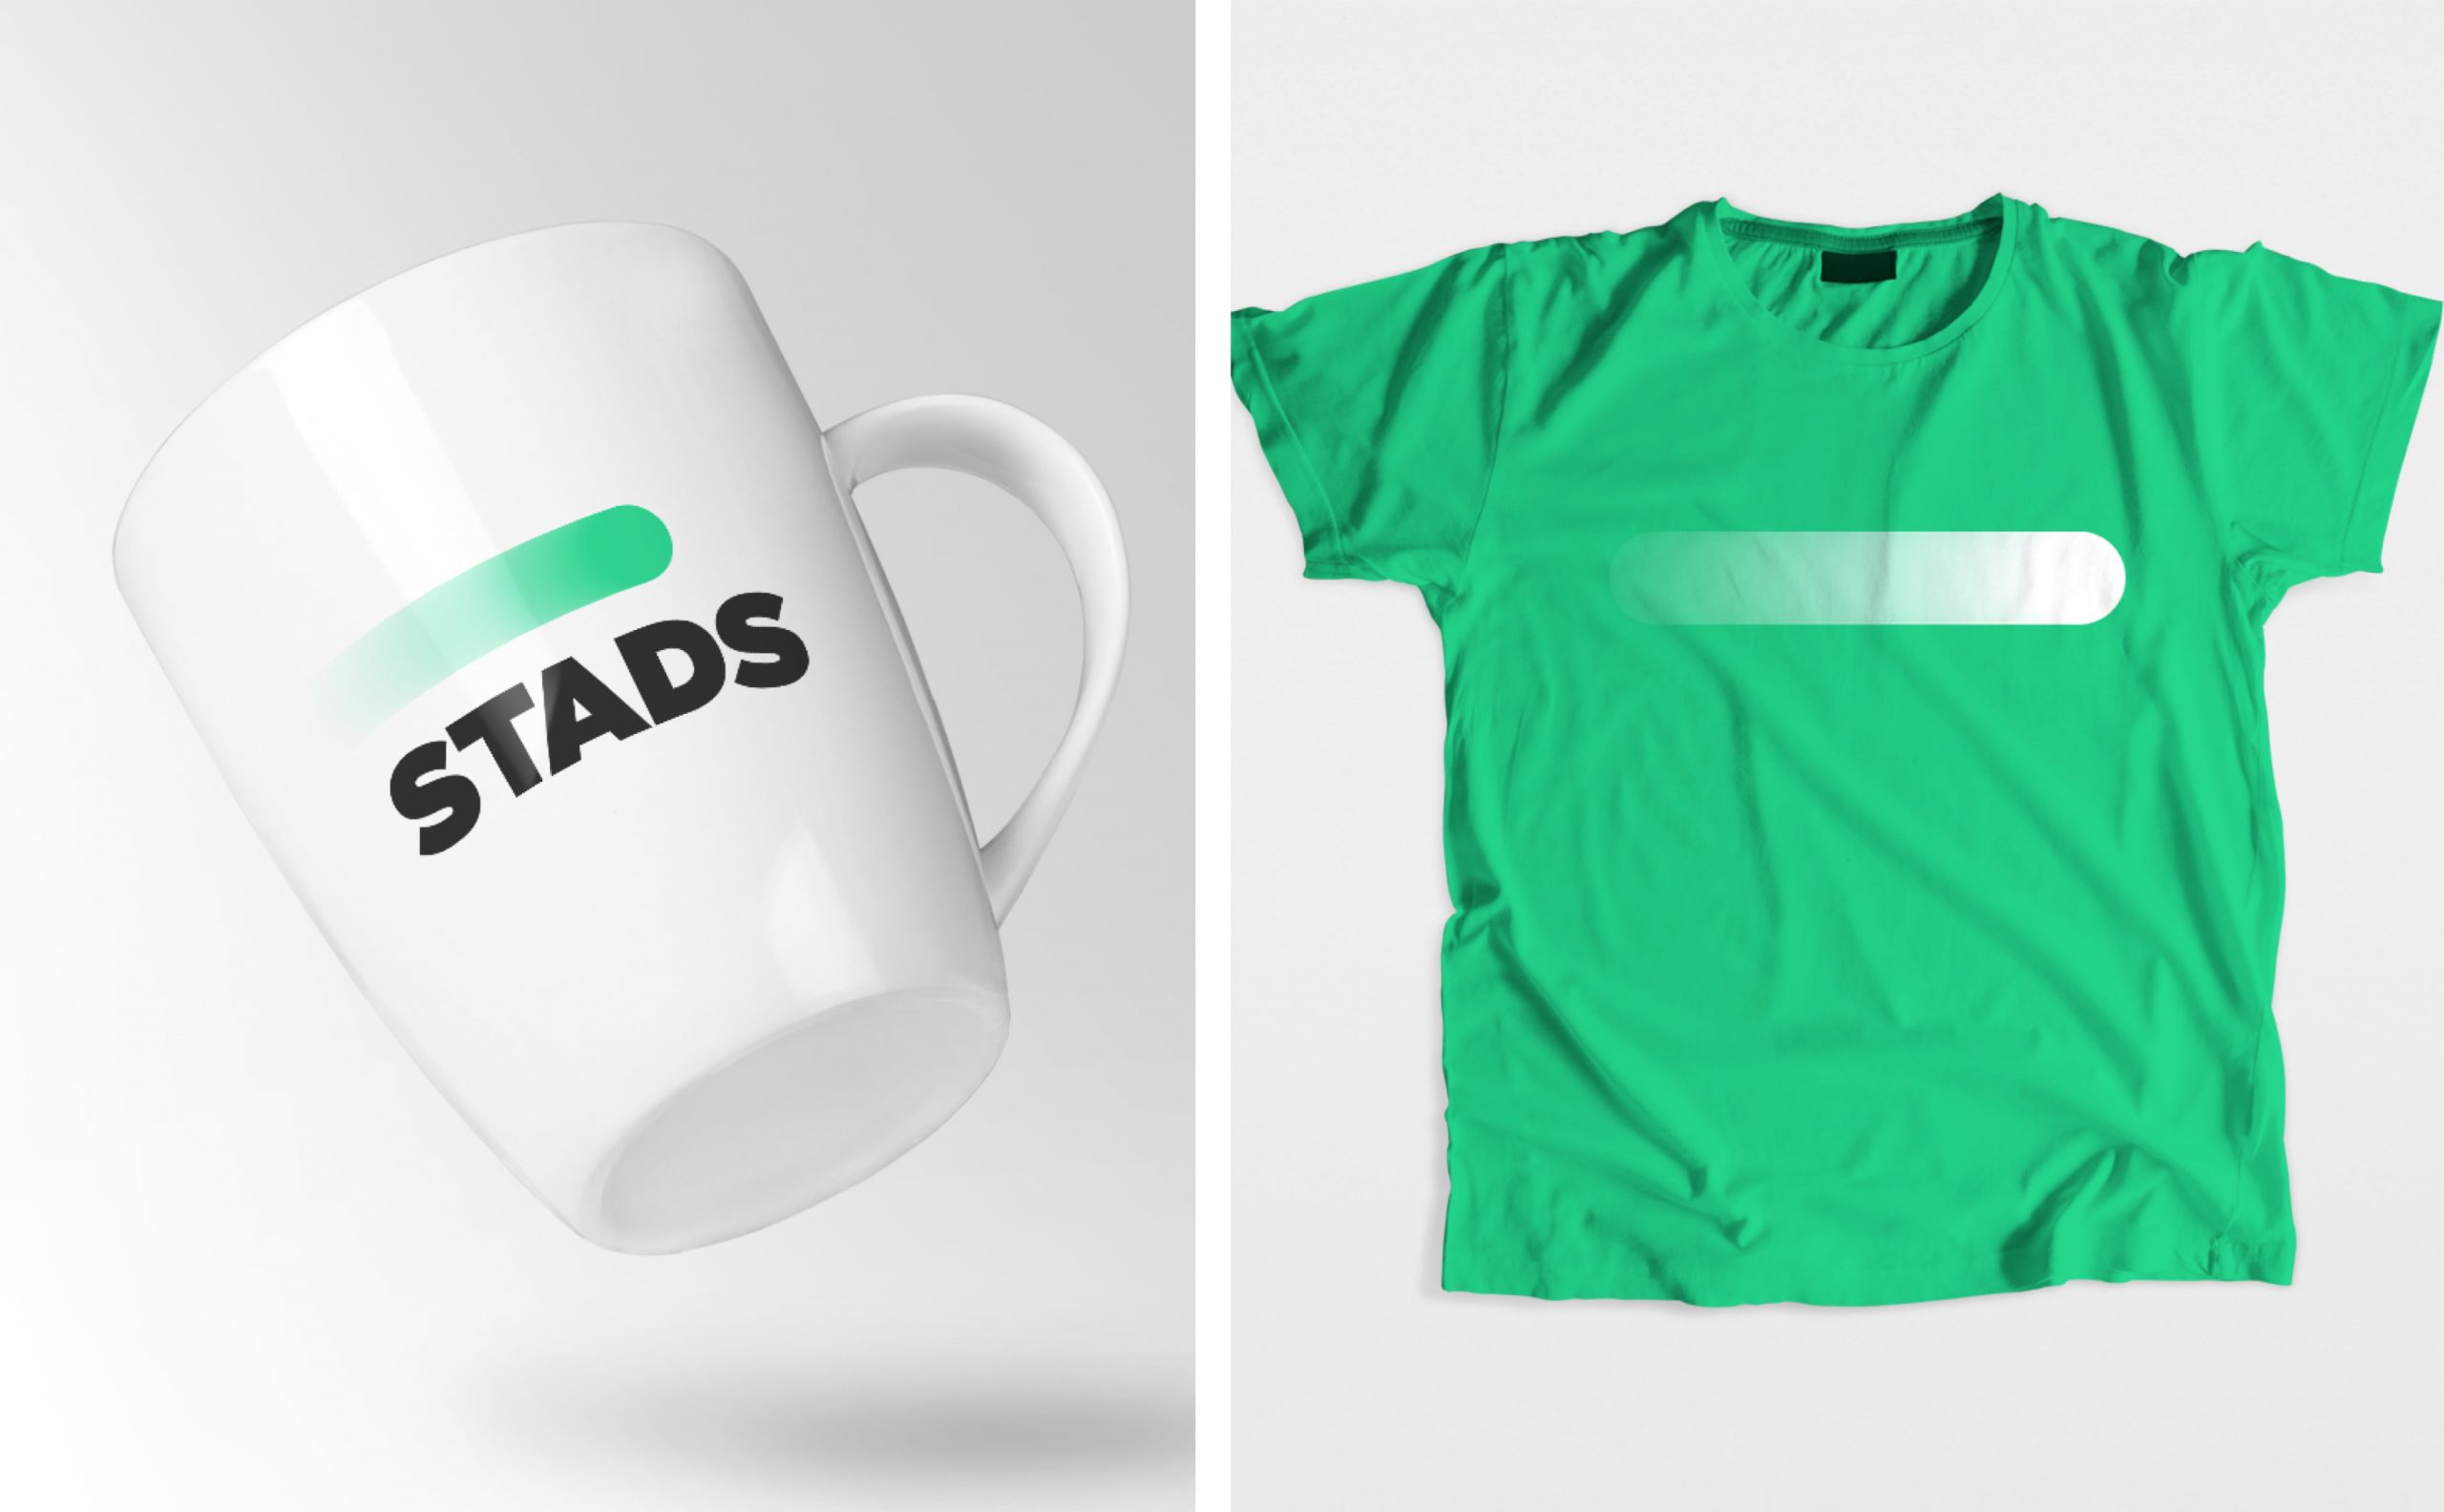 Stads branding and product design by hello.